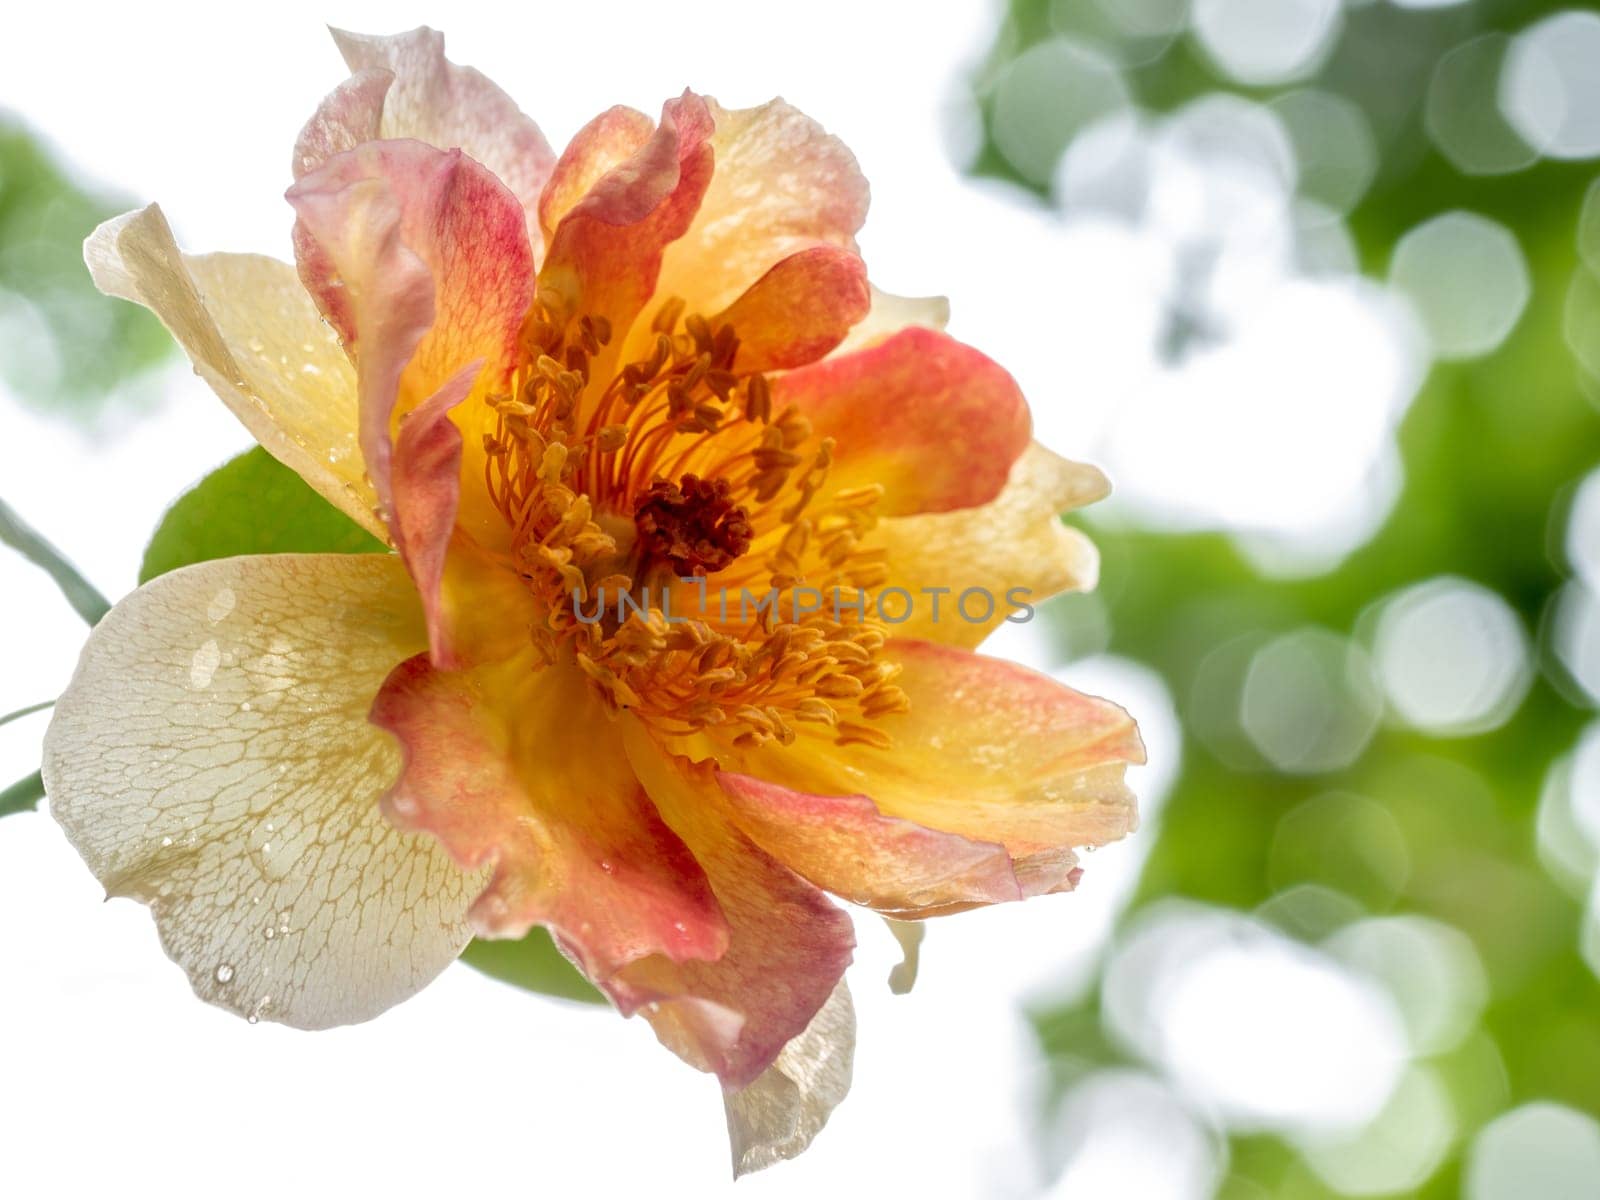 Shape and colors of La Parisienne roses that blooming in Tropical climates